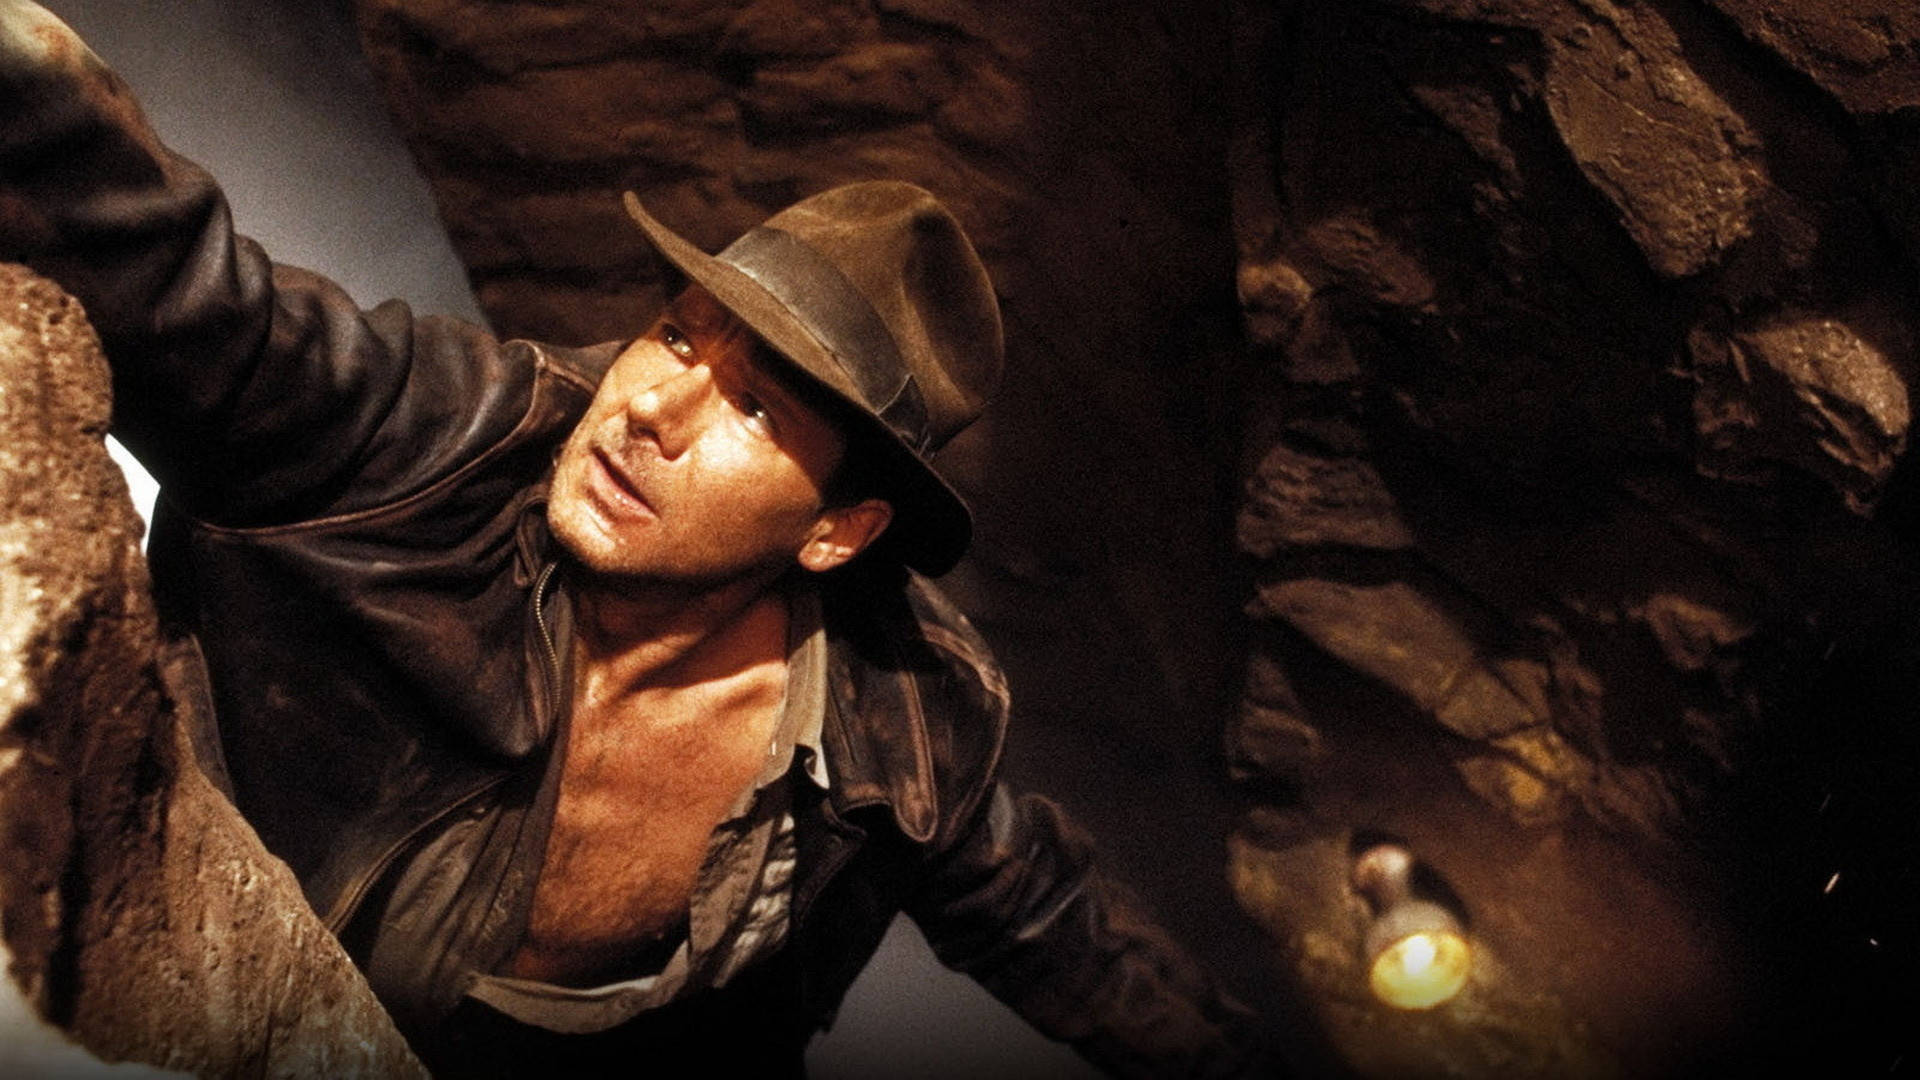 Harrison Ford As Indiana Jones On The Edge Of A Cliff Background